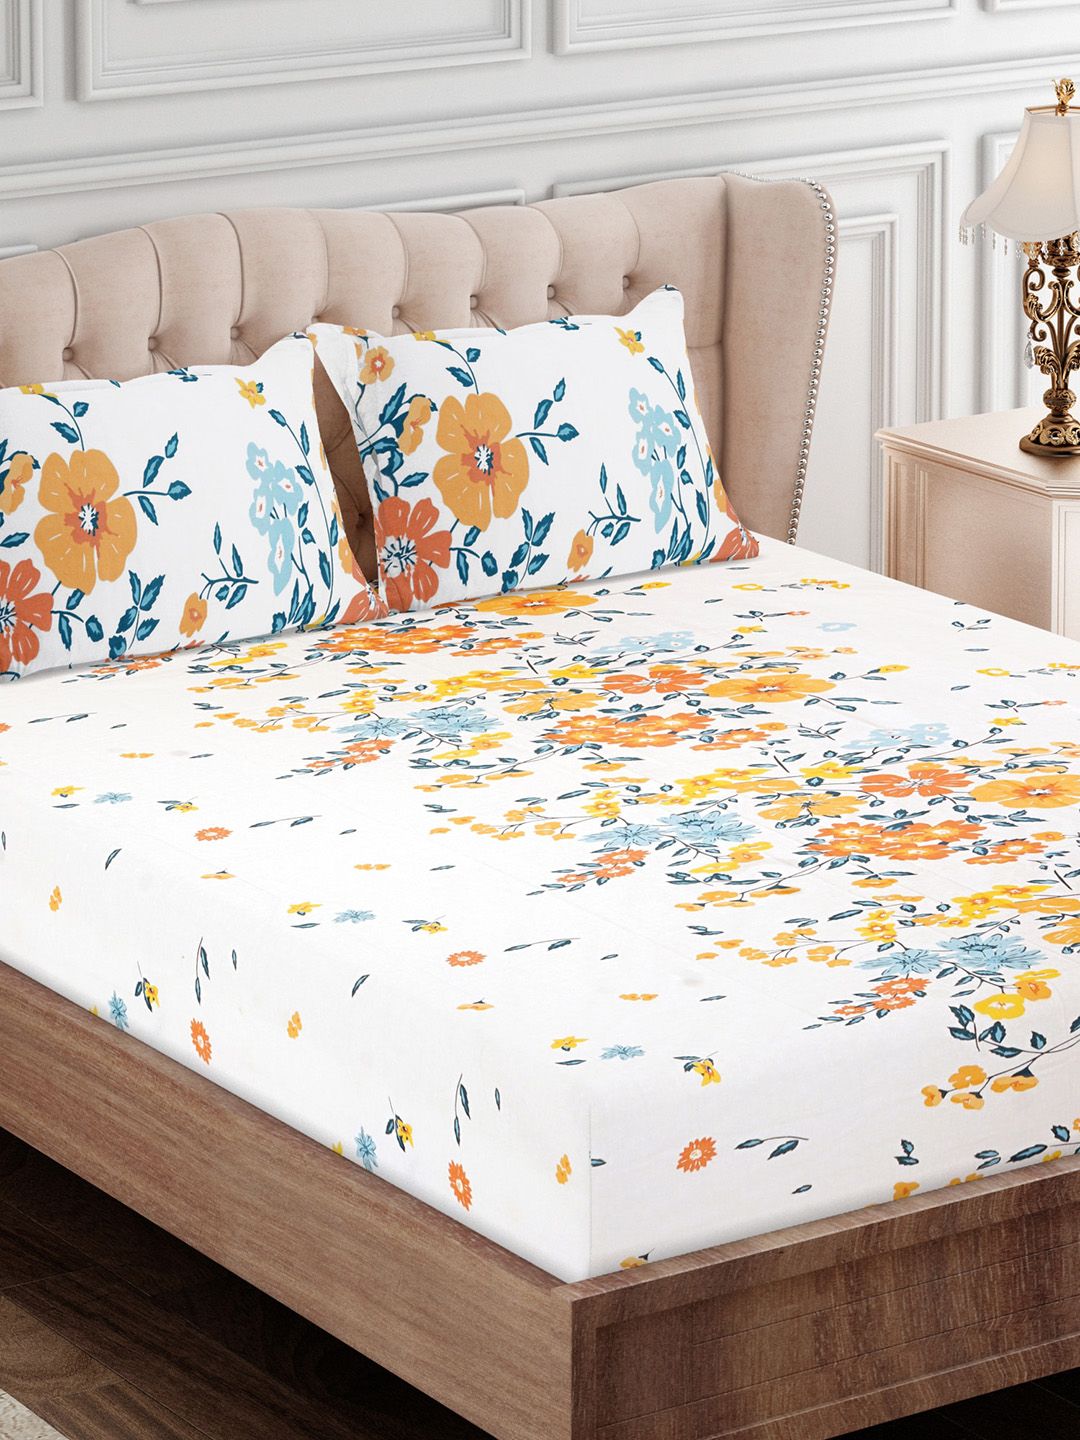 SEJ by Nisha Gupta Brown & White Floral 180 TC King Bedsheet with 2 Pillow Covers Price in India